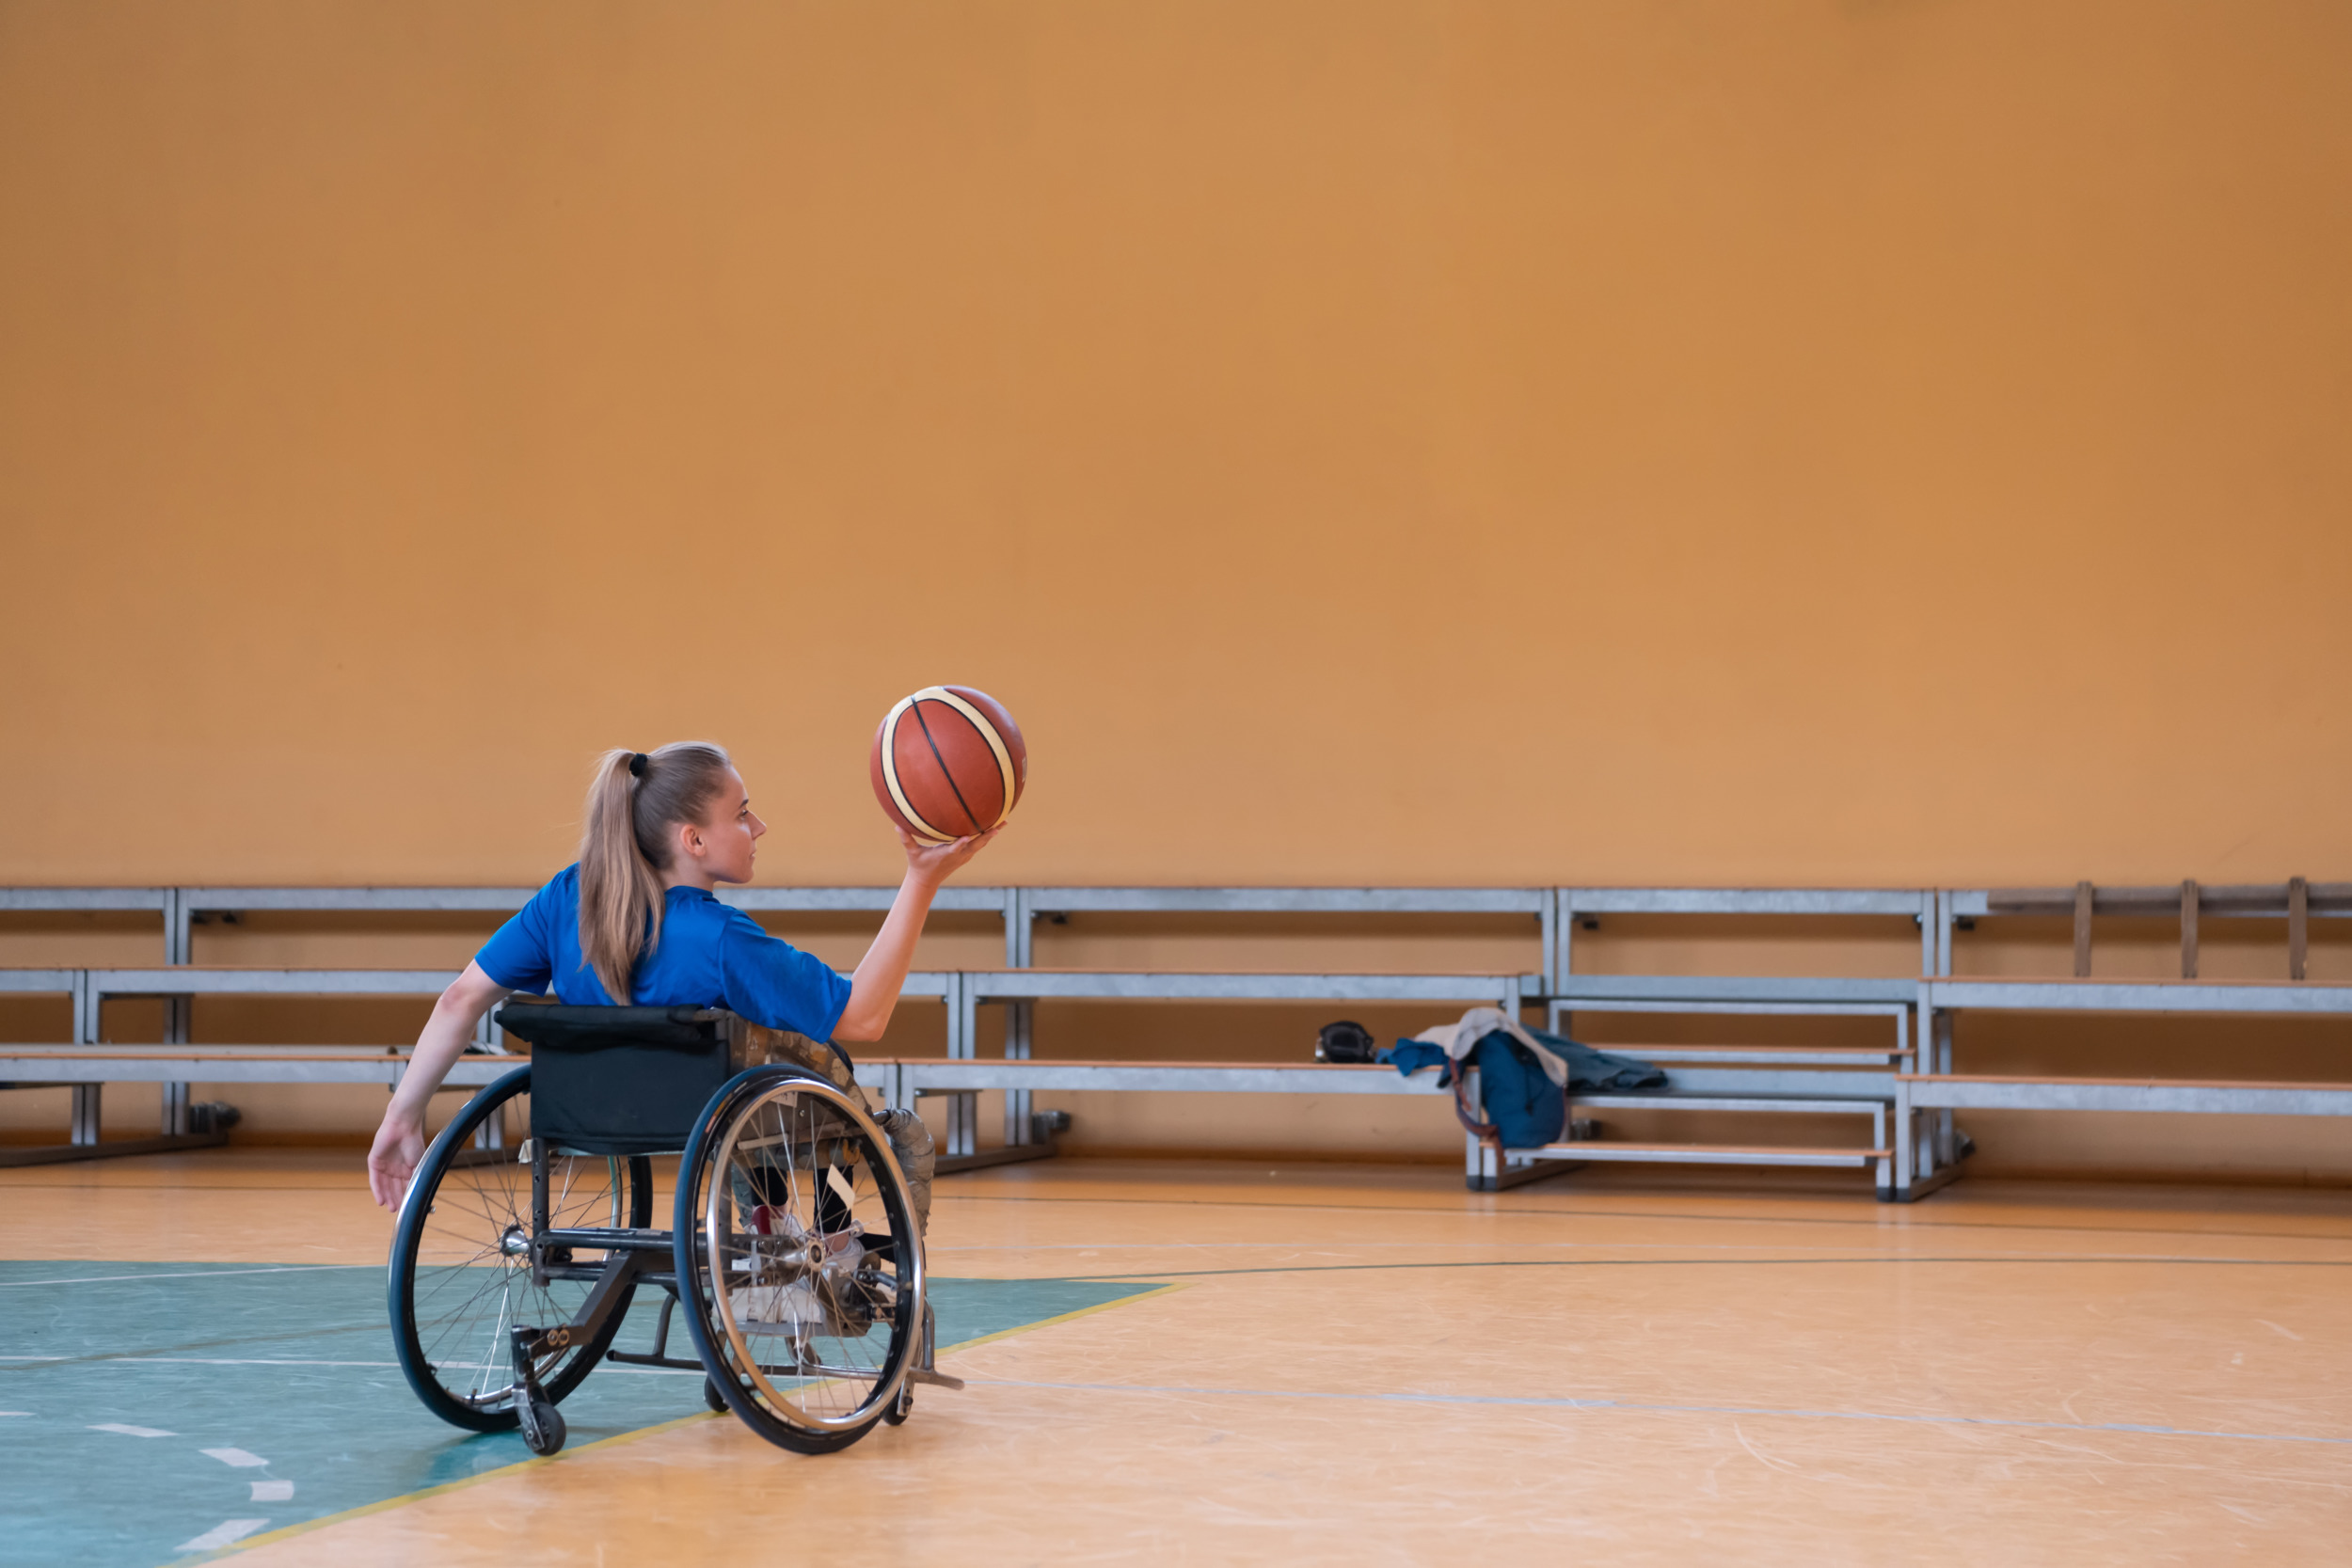 Yes, you can do this': The story behind the rapid rise in sports for youth  with disabilities